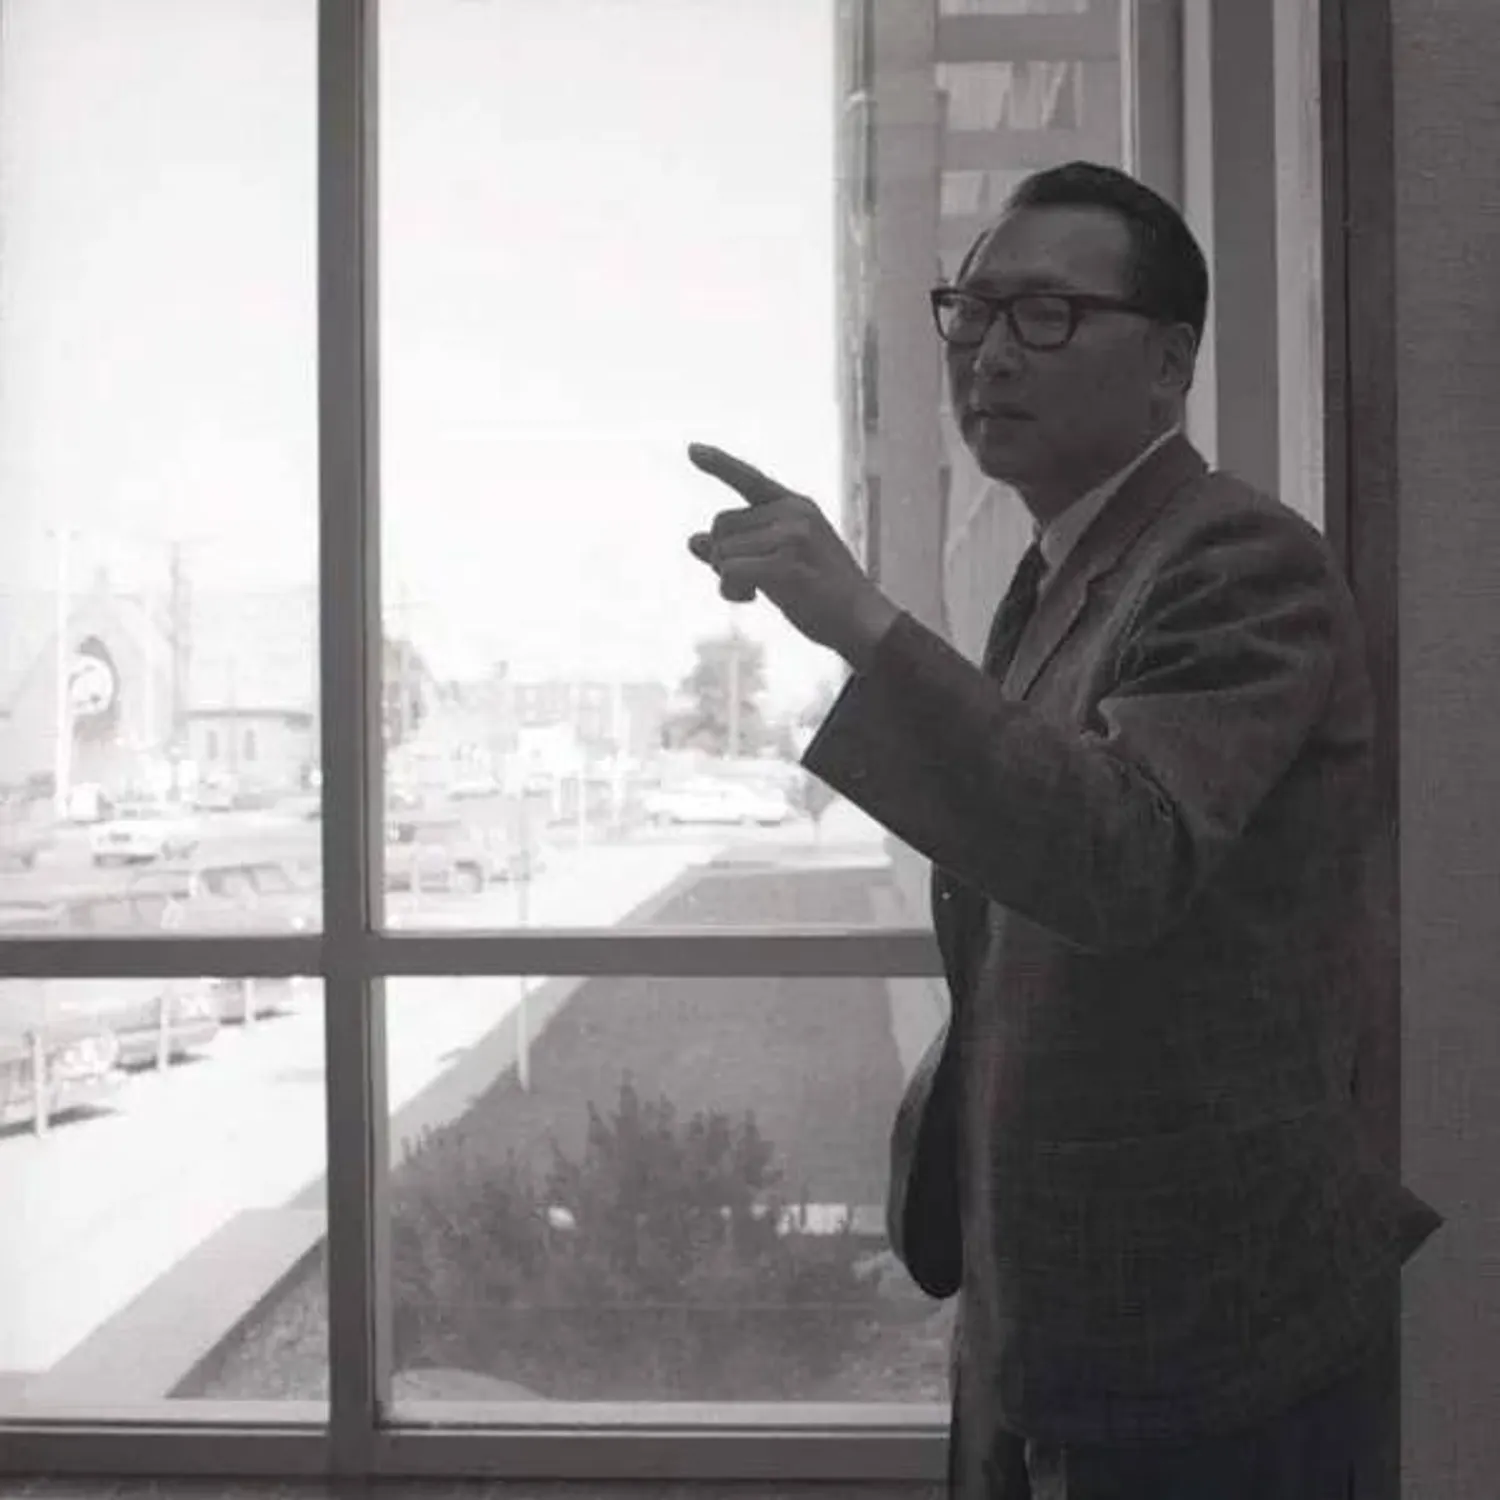 A man with glasses and a suit stands in front of a window. He is pointing at something beyond the image.